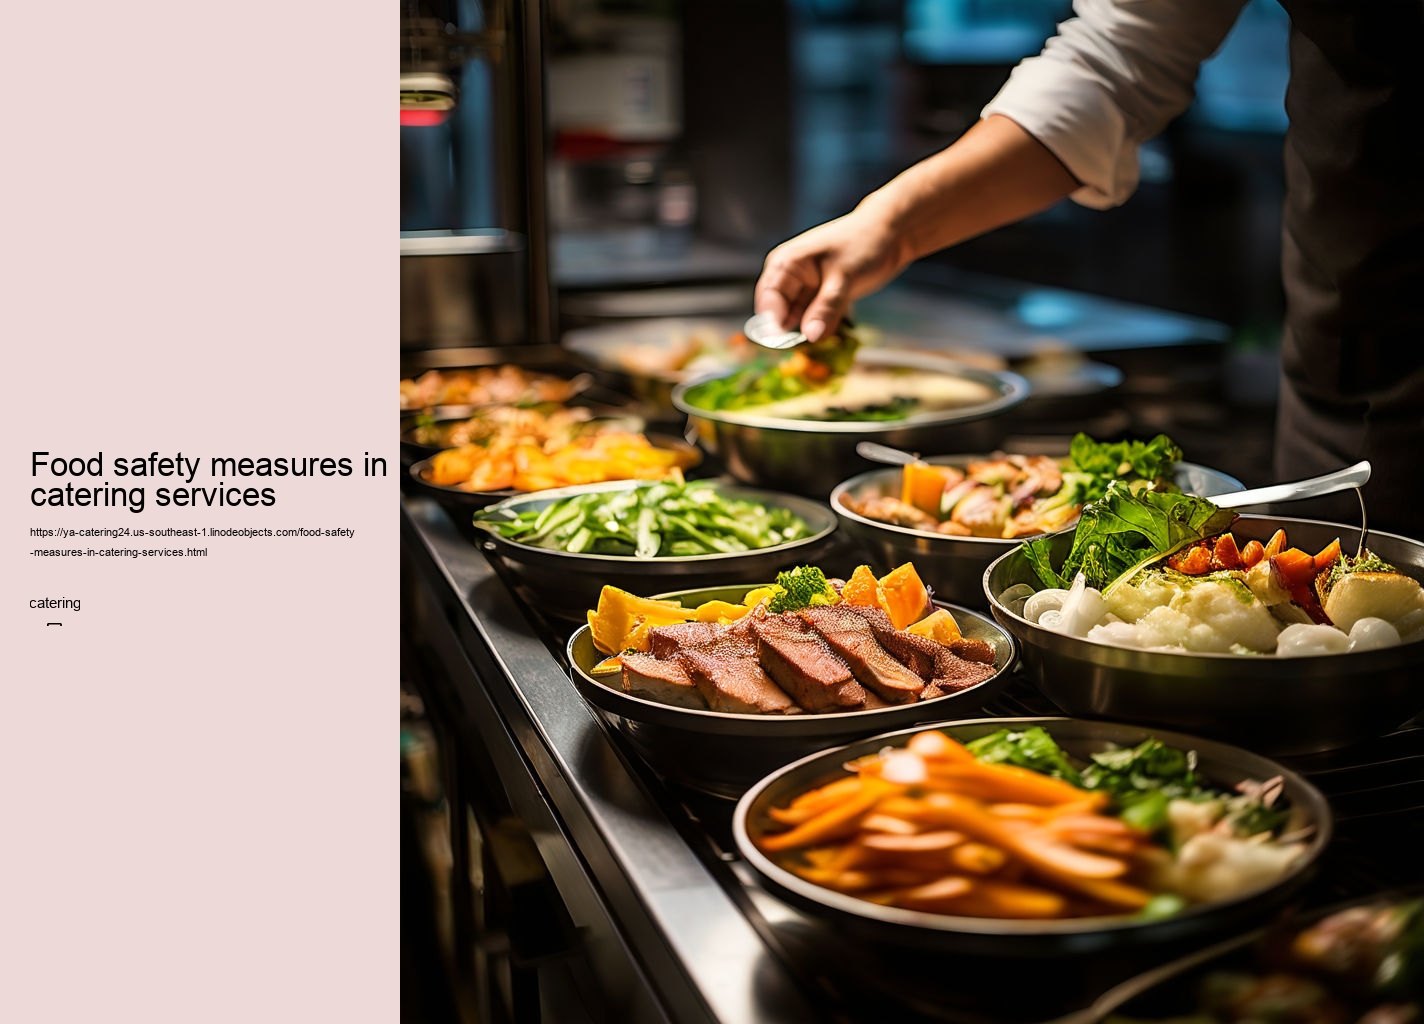 Food safety measures in catering services